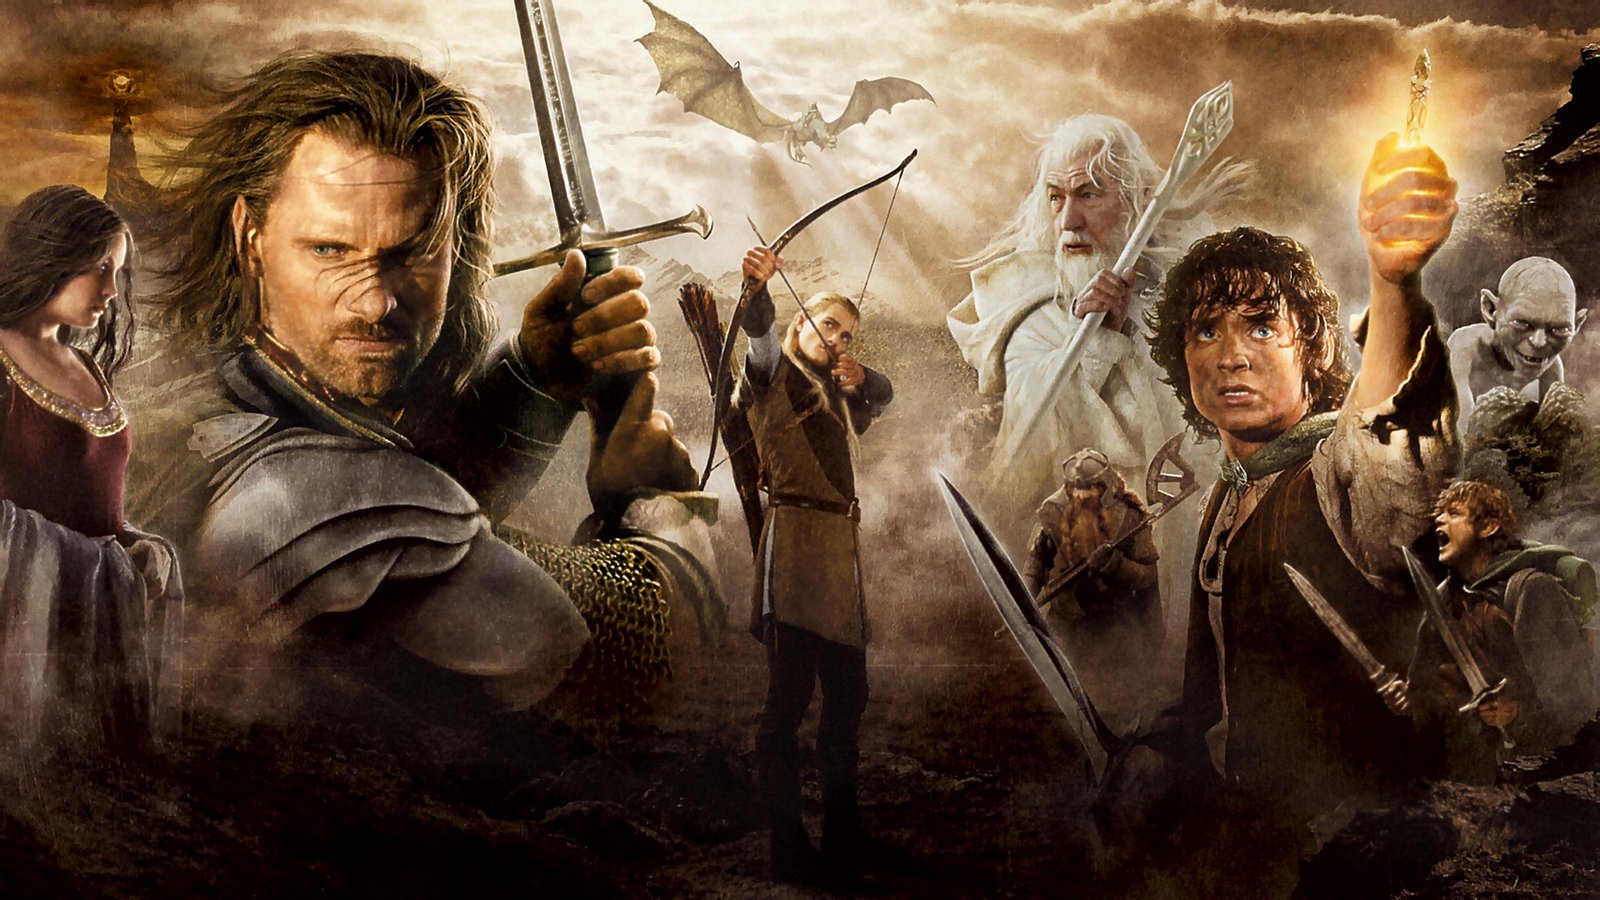  / The Lord of the Rings: The Return of the King